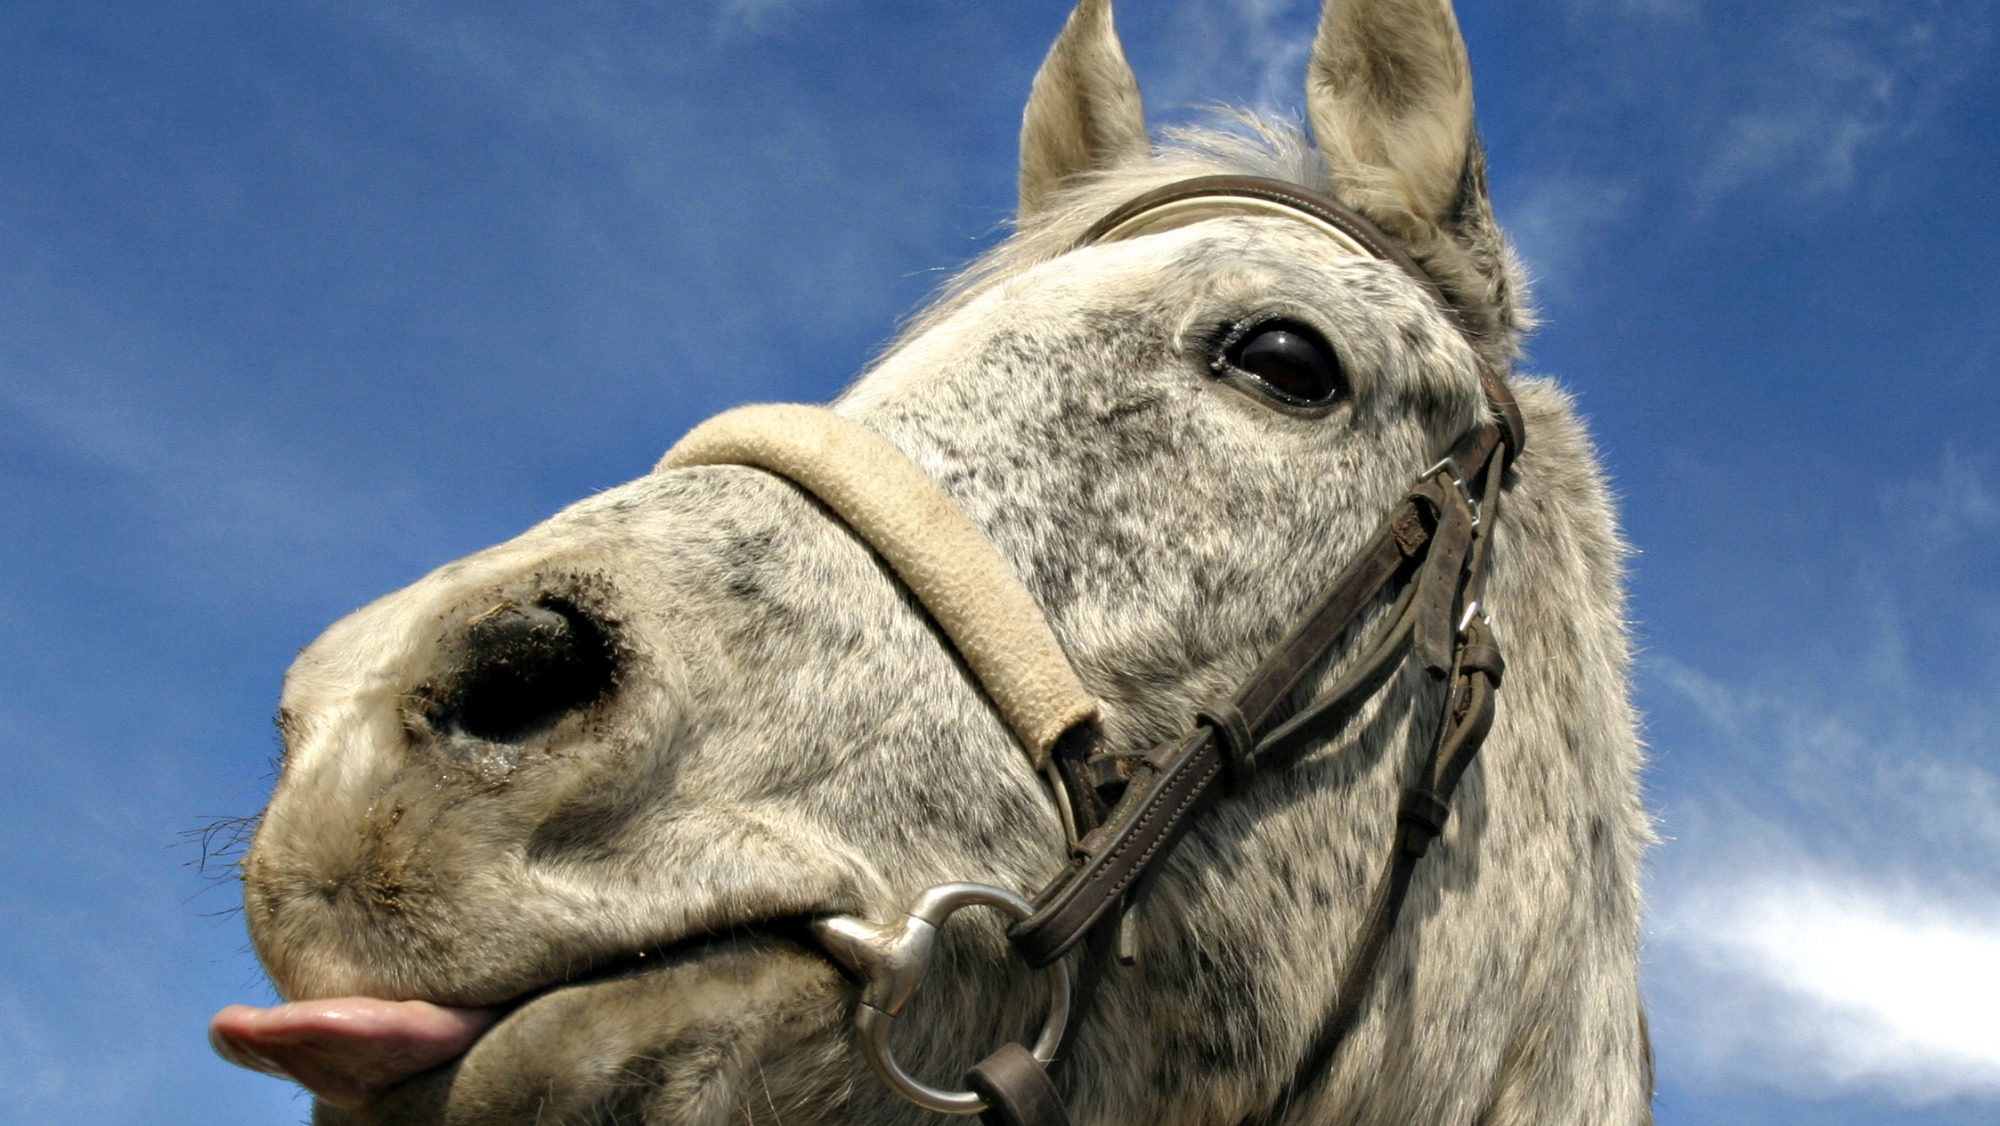 A horse with its tongue out